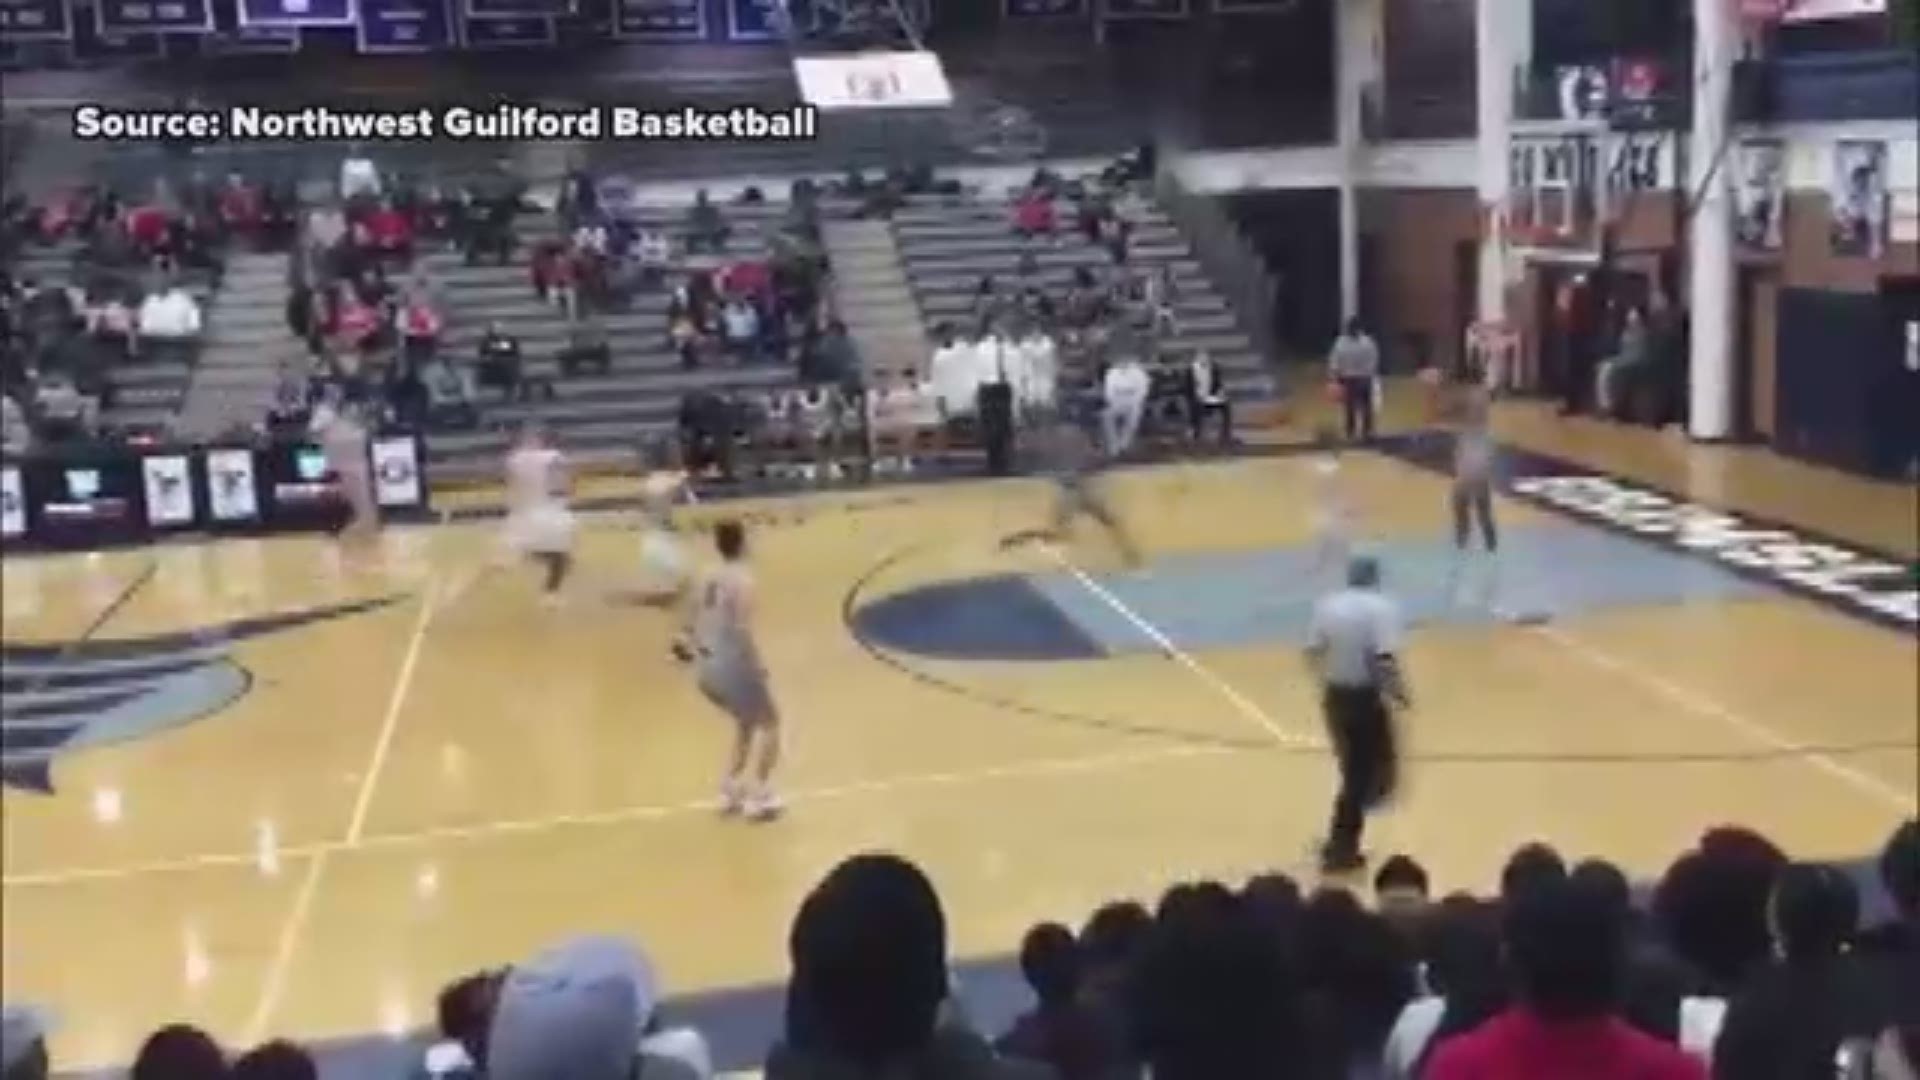 Did that really just happen? Watch Northwest Guilford's senior guard Christian Hampton shatter the backboard during a slam dunk against Grimsley.